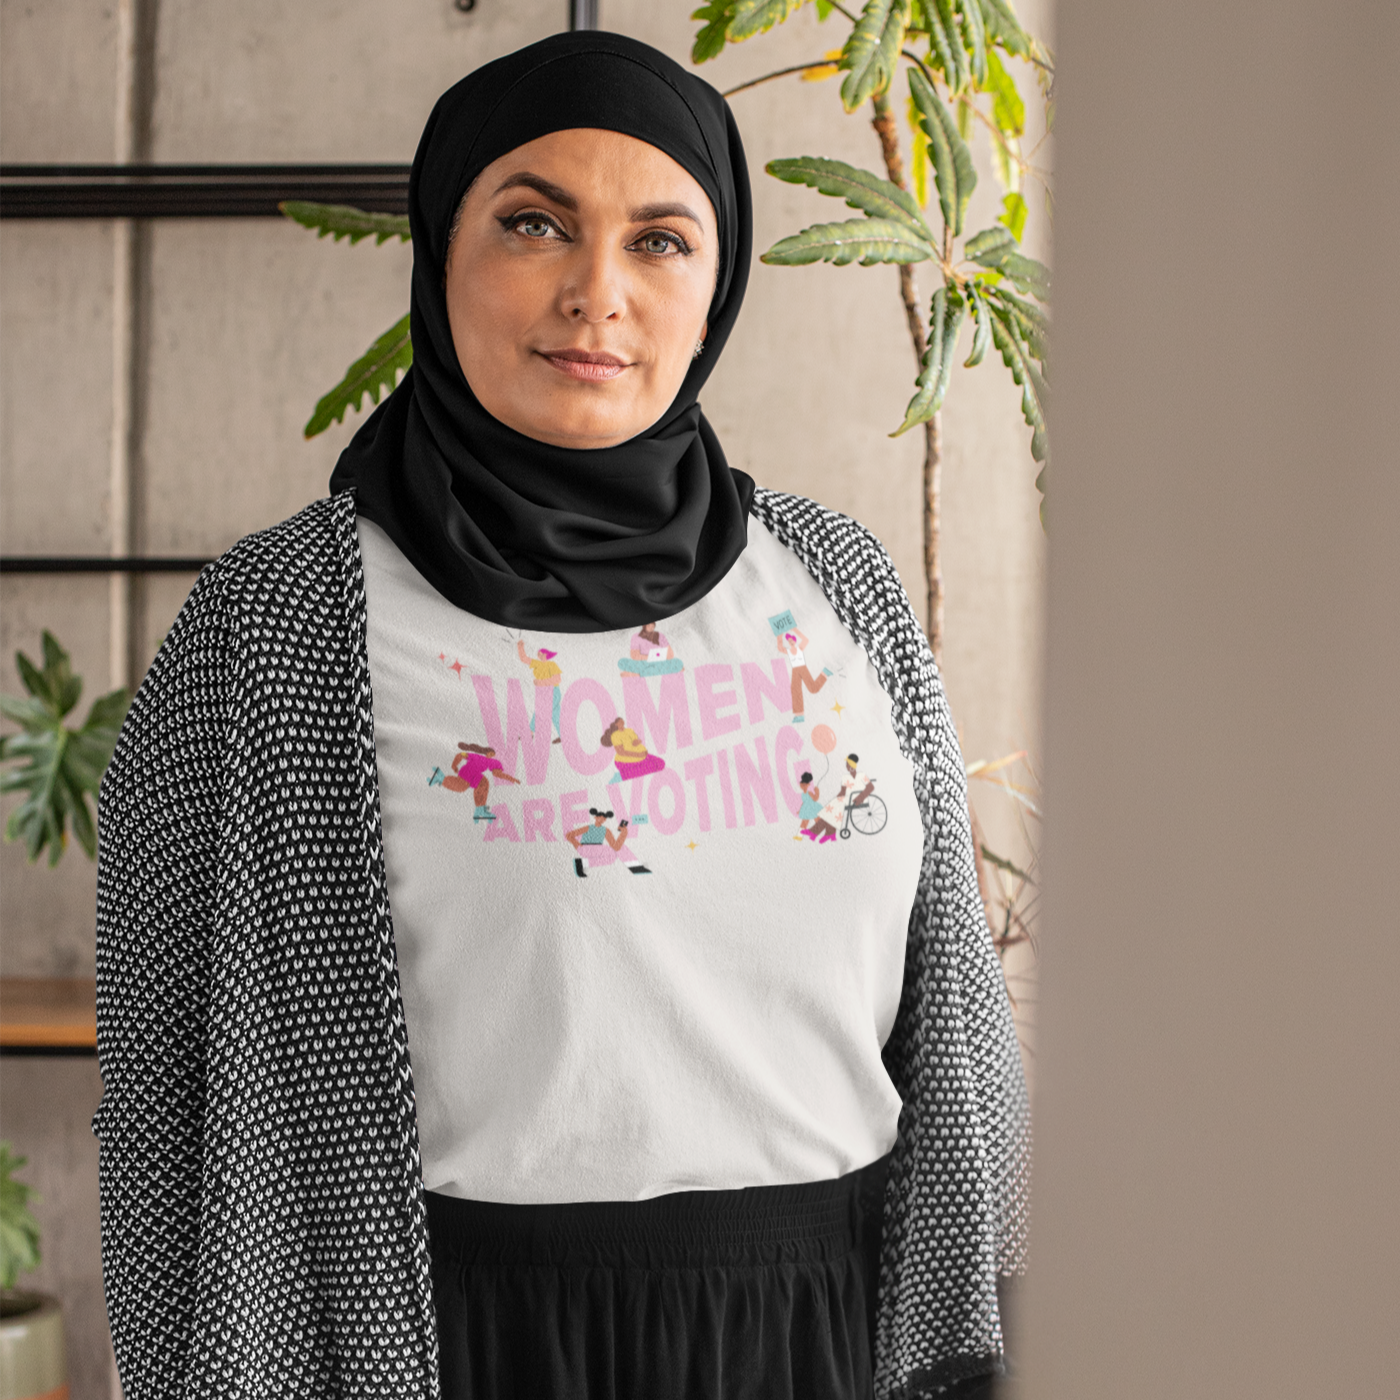 Photo of a woman with a black hijab who is wearing the Women Are Voting Unisex T-shirt.